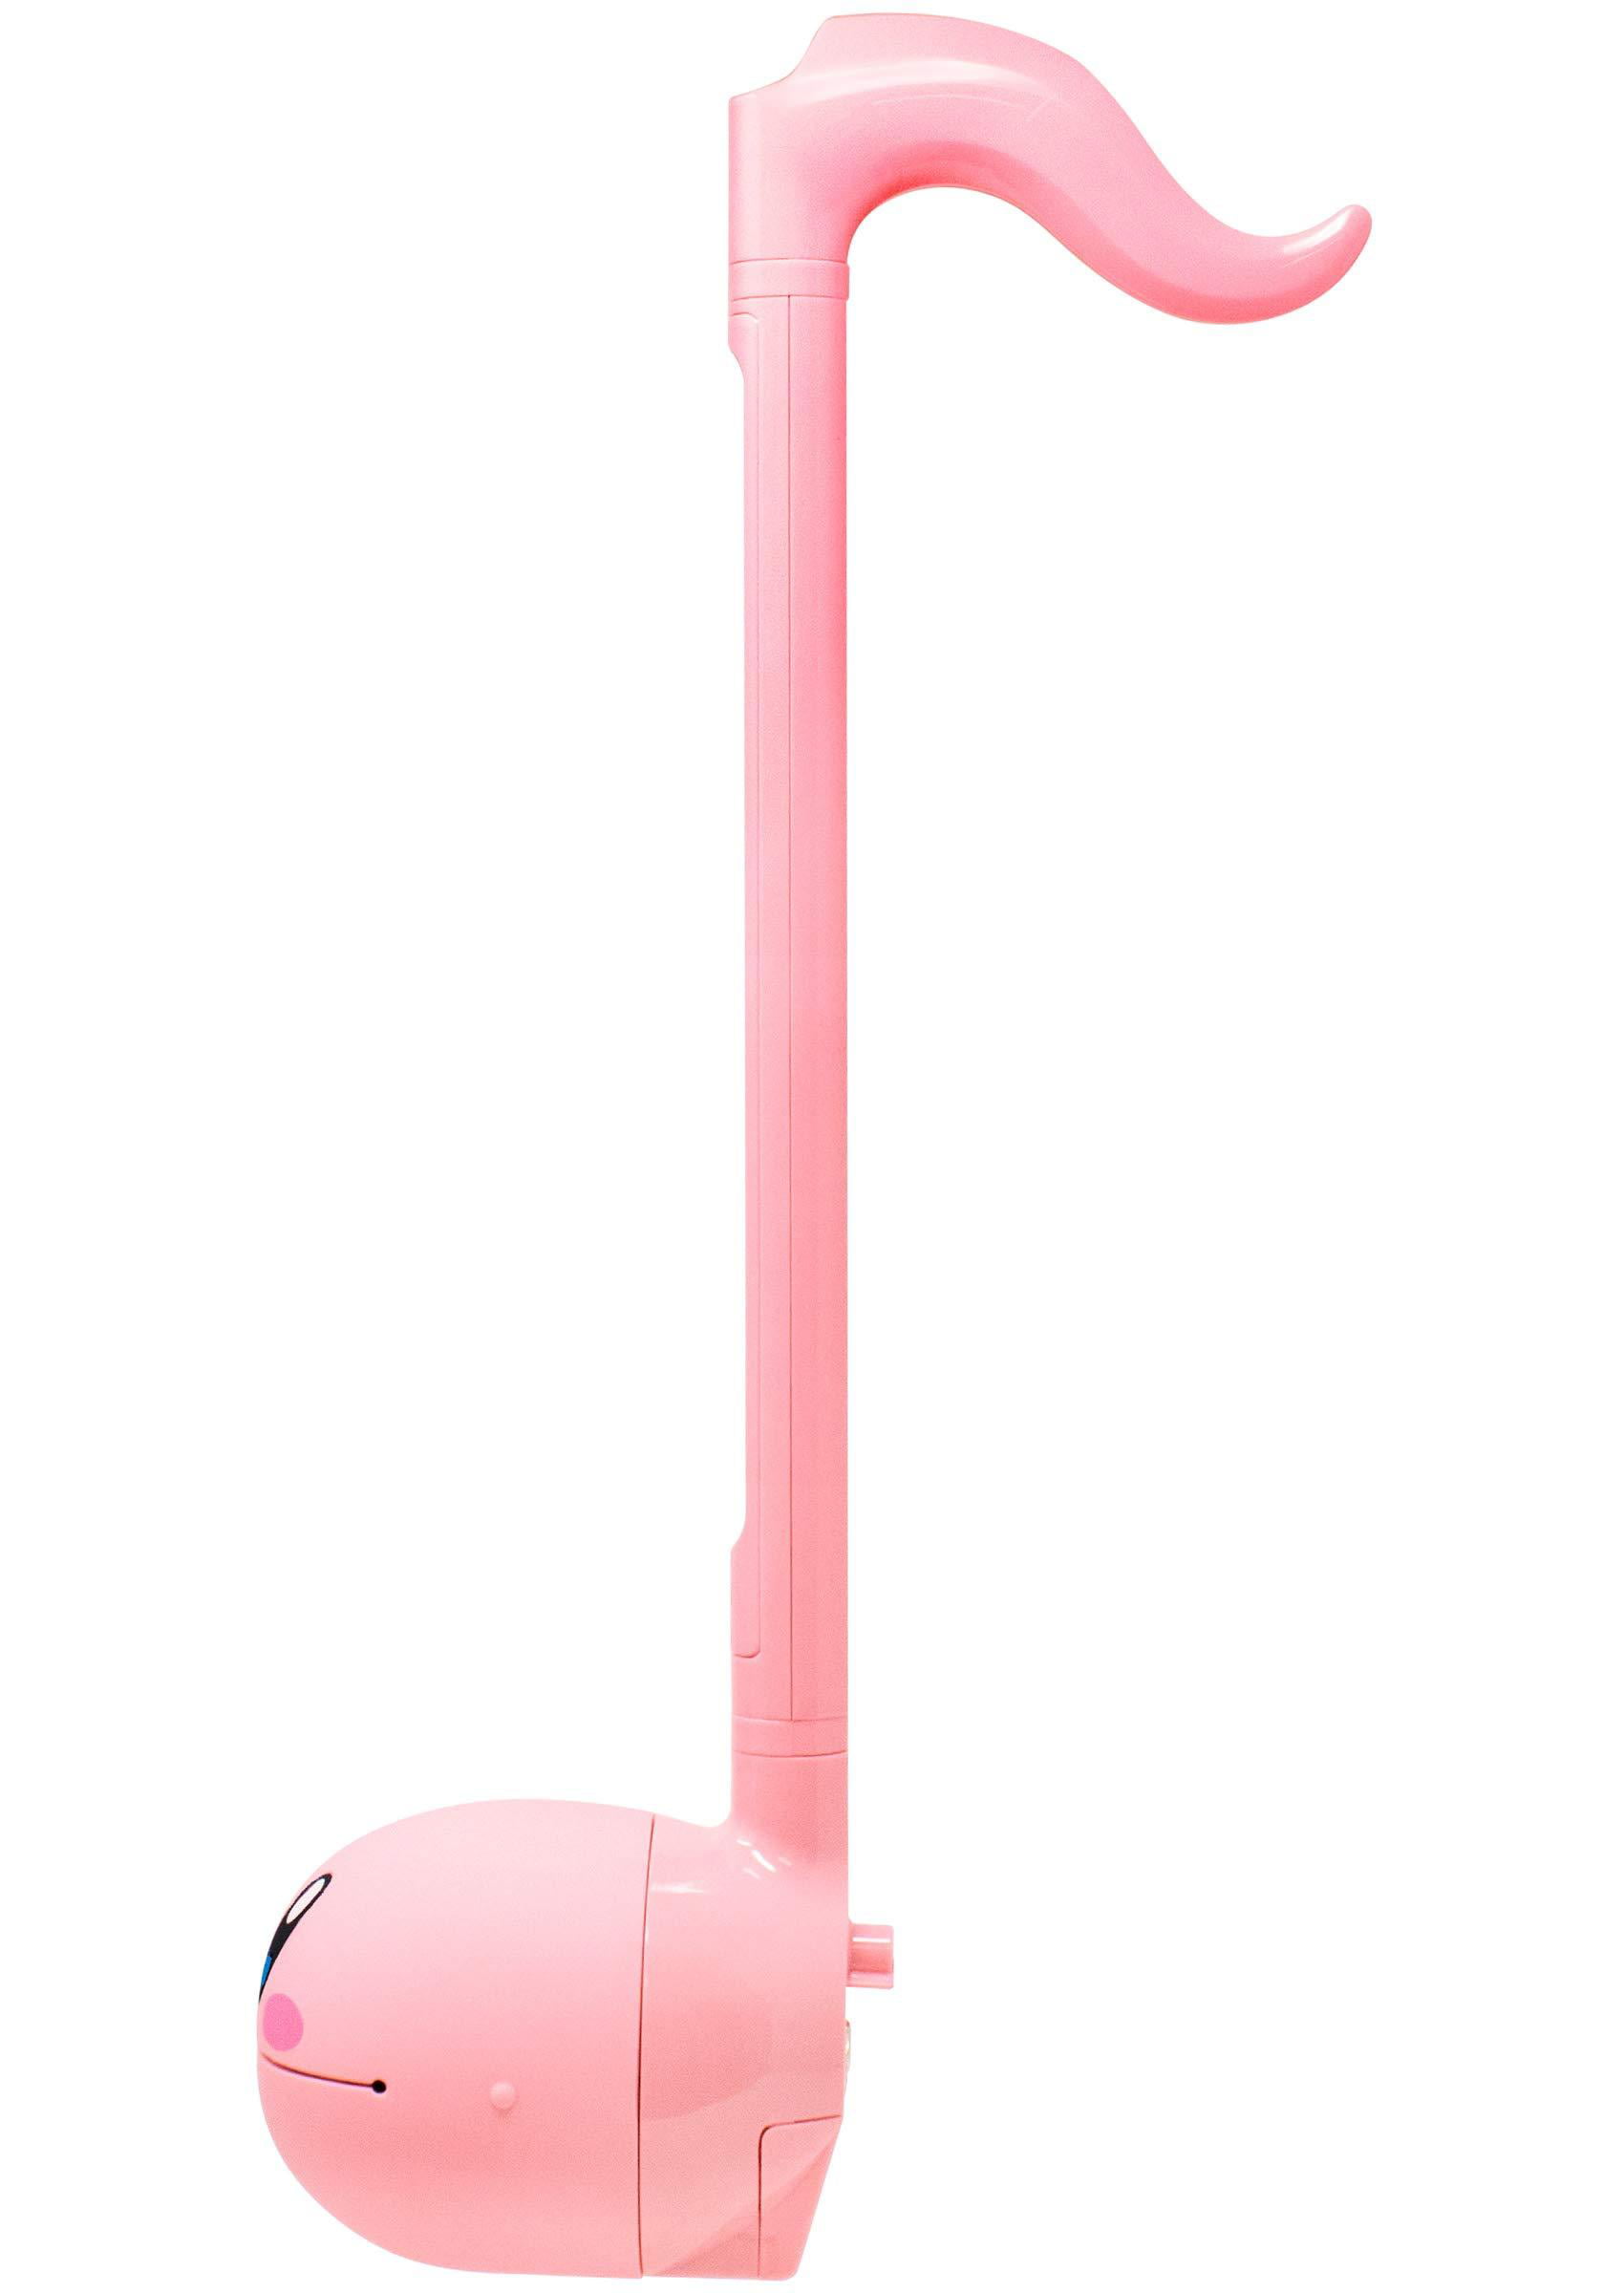 Otamatone Kirby Fun Japanese Electronic Musical Instrument Toy Synthesizer  Deluxe Size for Children and Adults